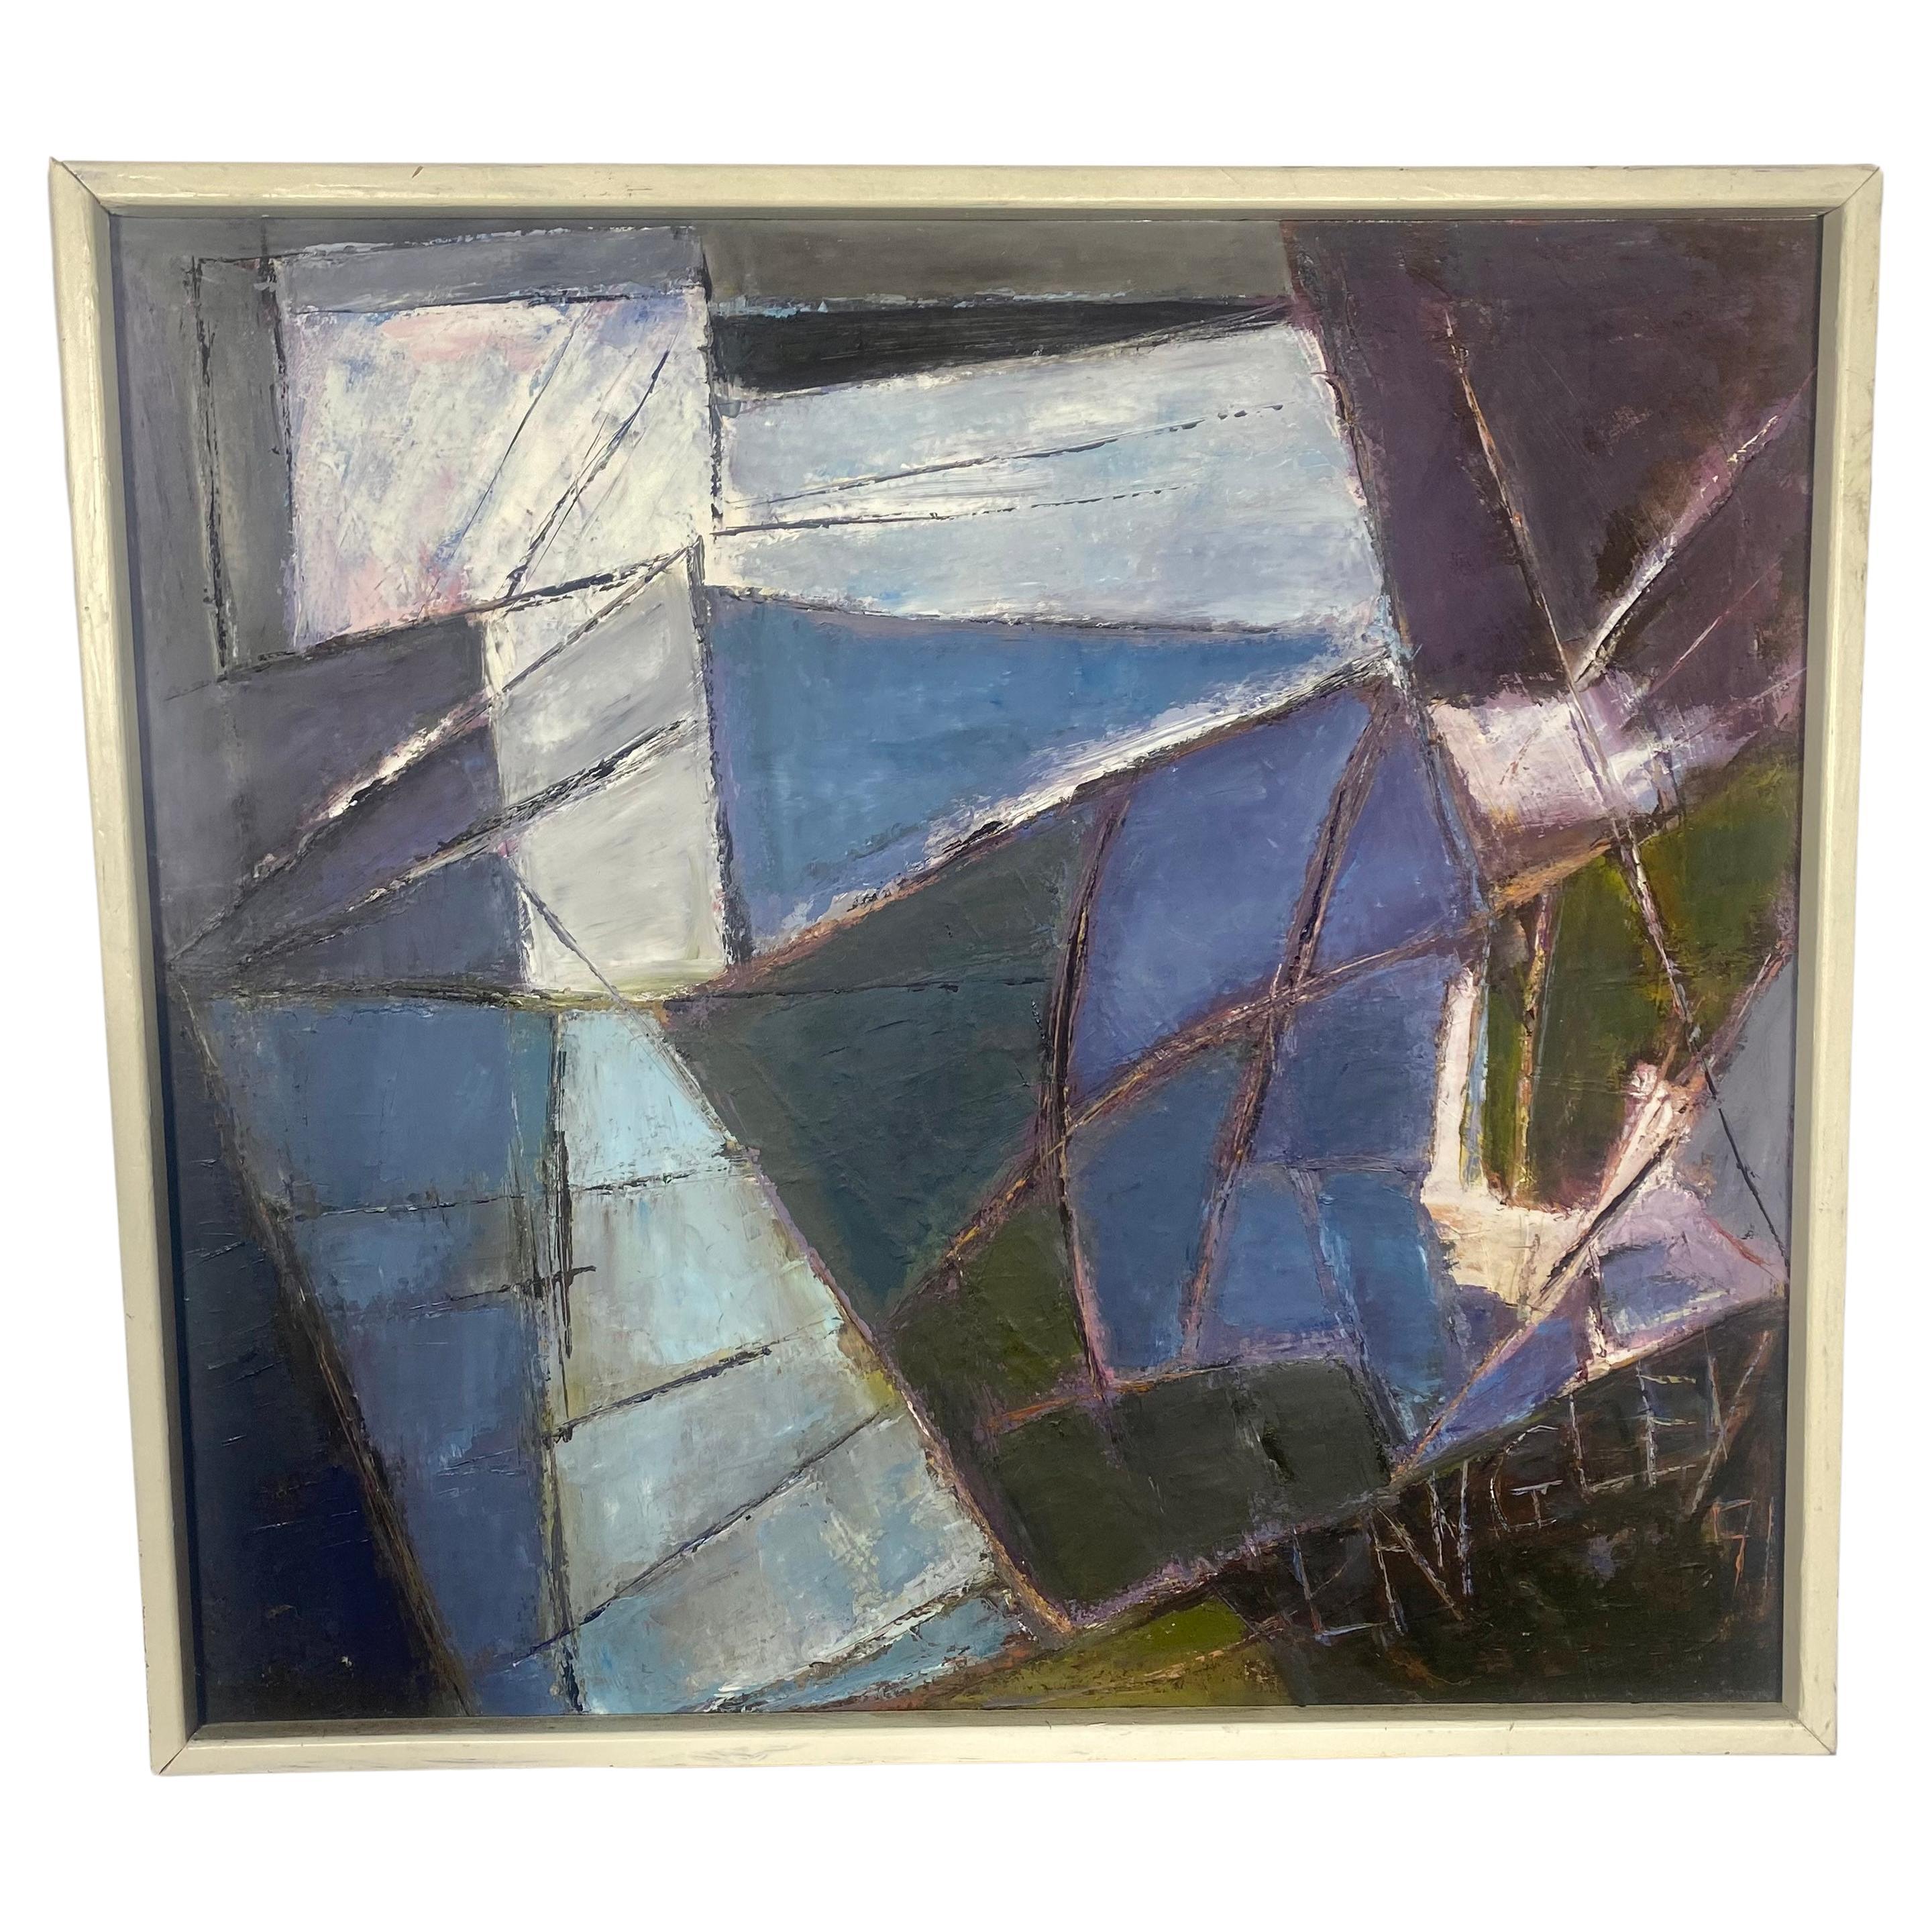 Modernist Abstract Oil Painting on canvas by WNY Artist Kathrin Langley